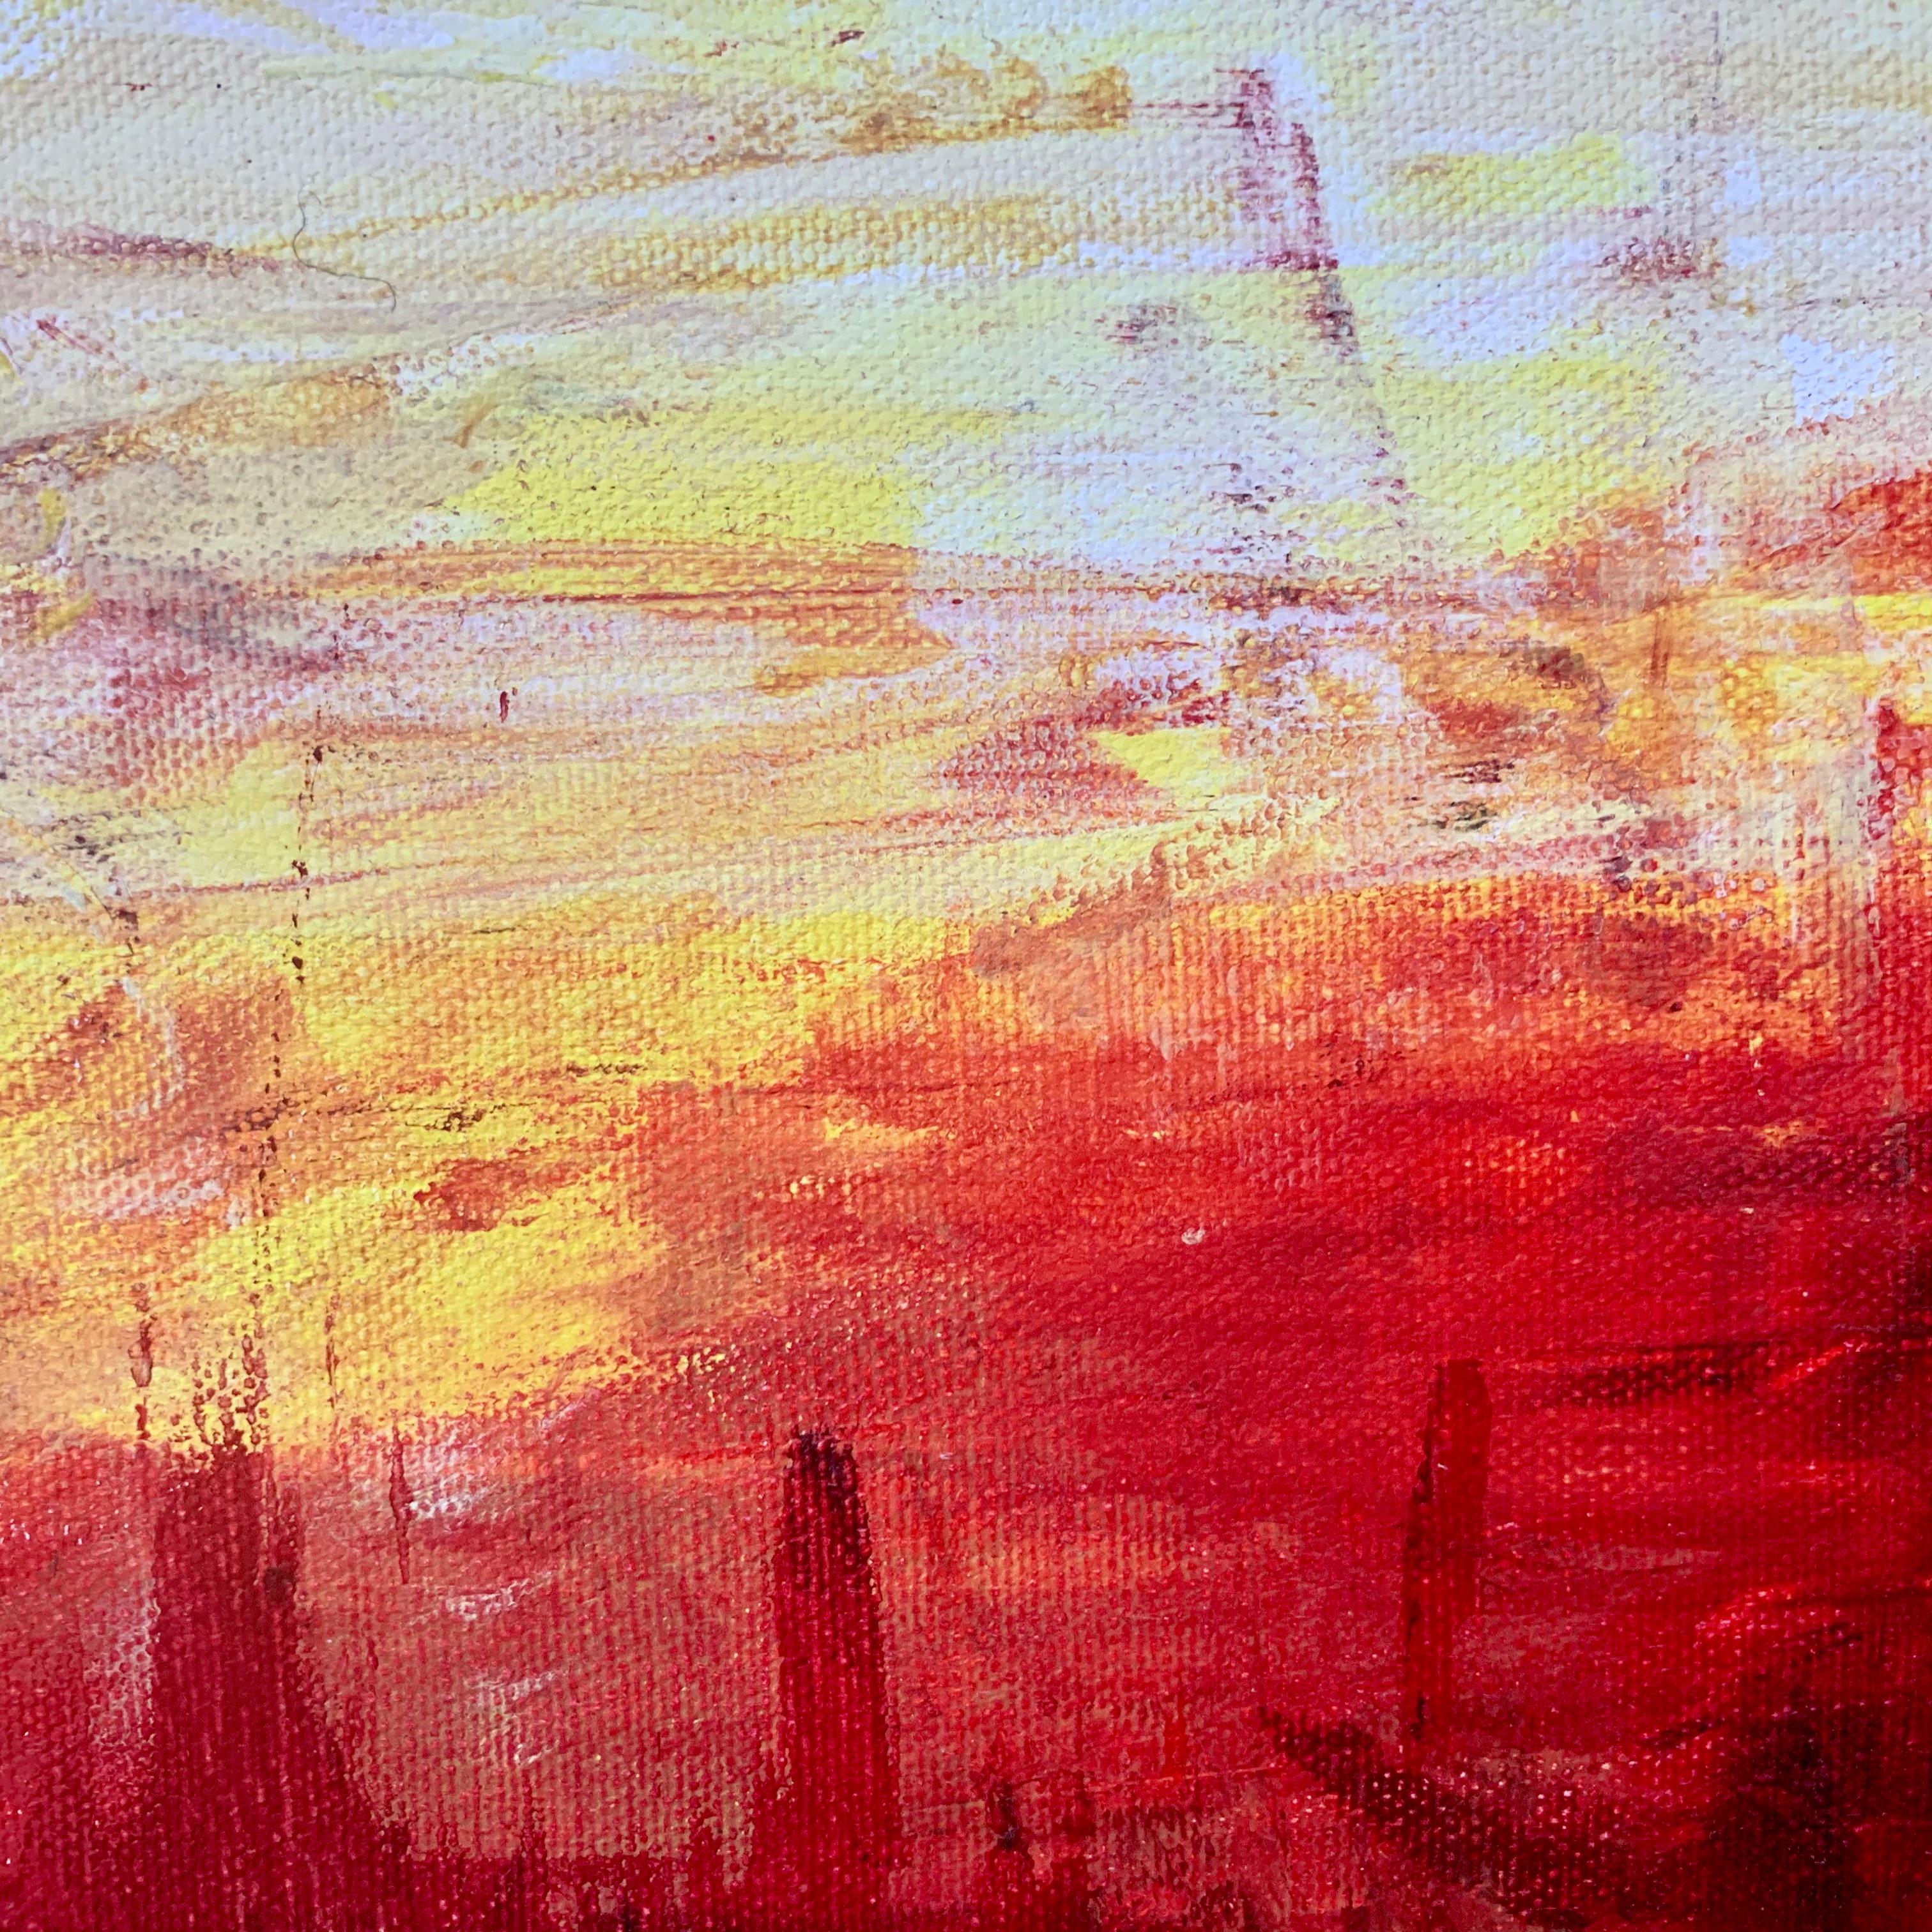 Red & Yellow Abstract Expressionist Landscape Painting by British Urban Artist For Sale 5